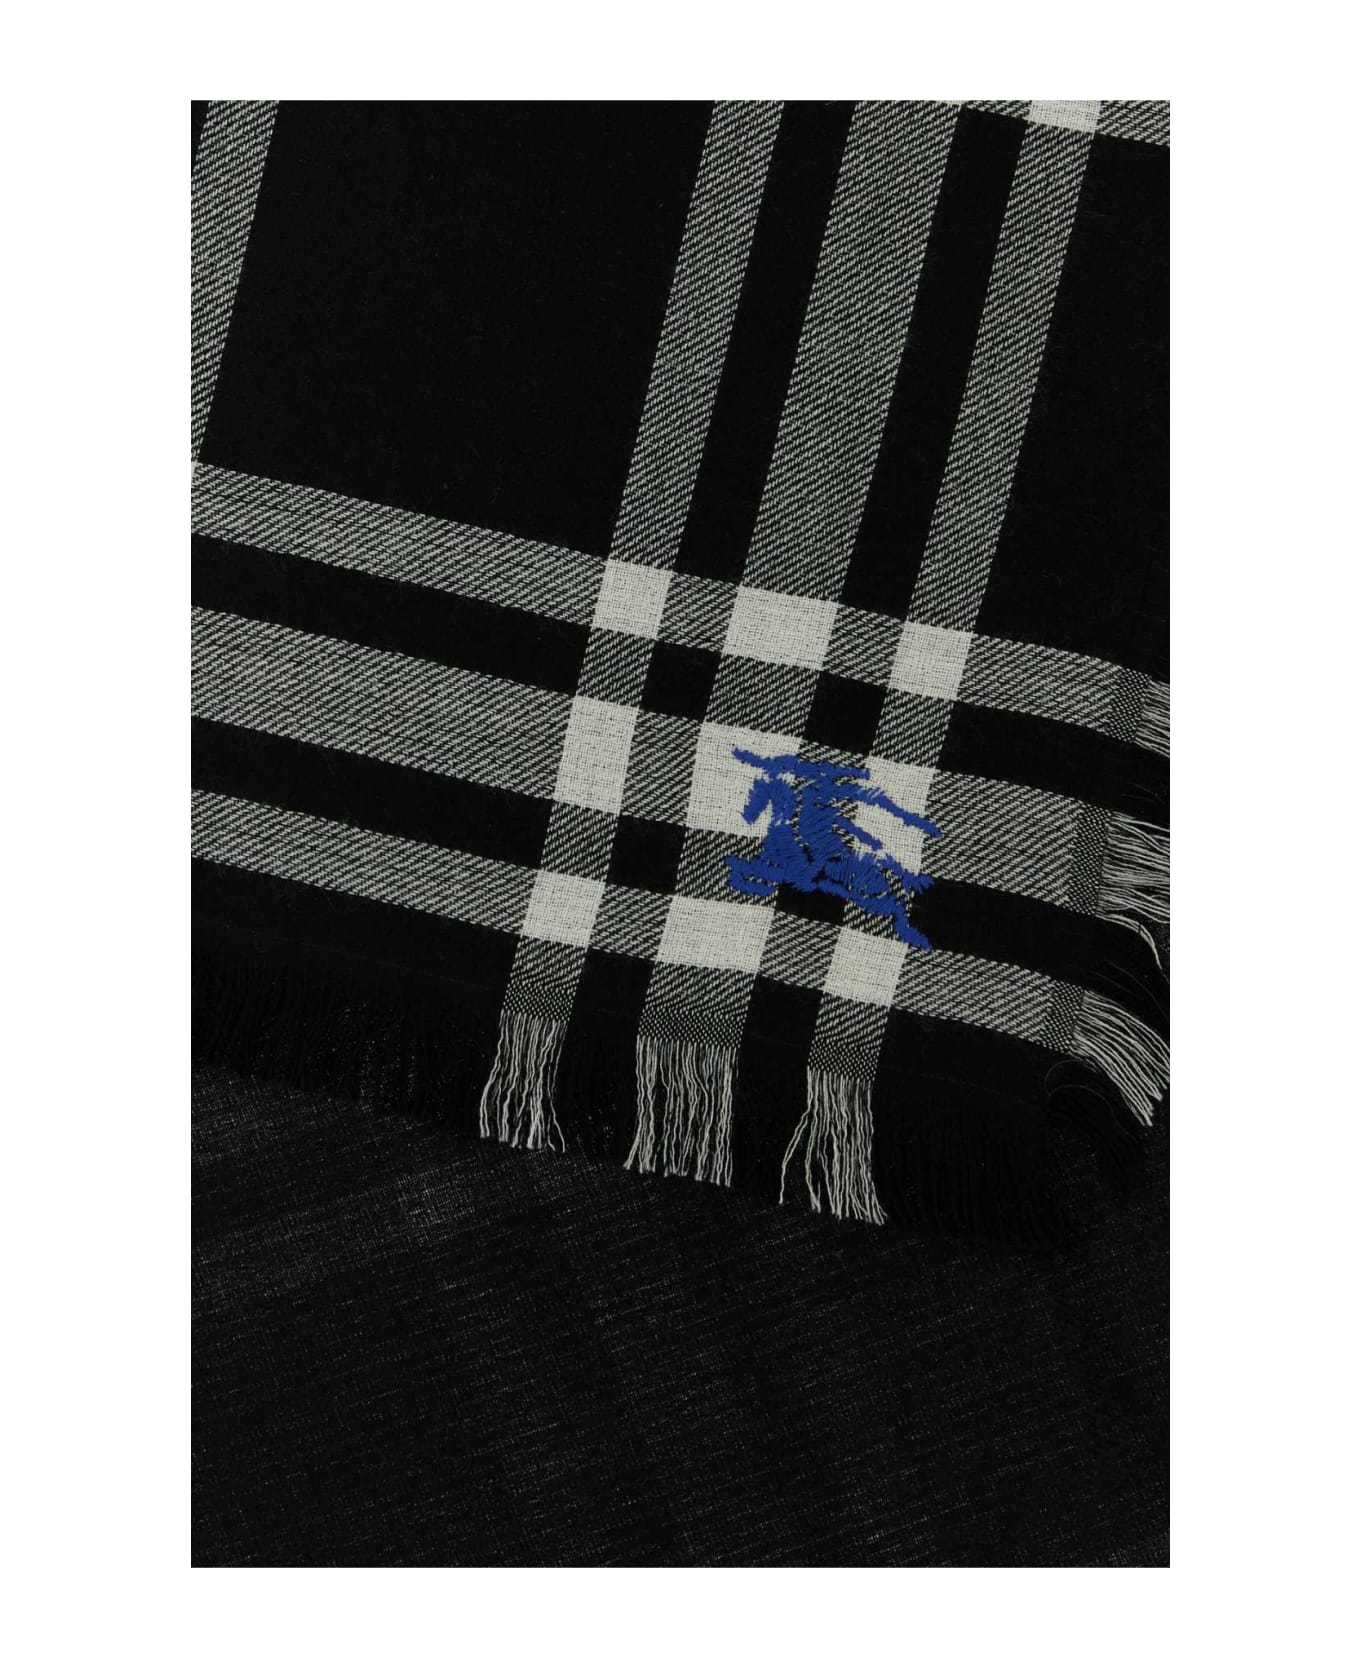 Burberry Embroidered Wool Blend Scarf - BLACK スカーフ＆ストール